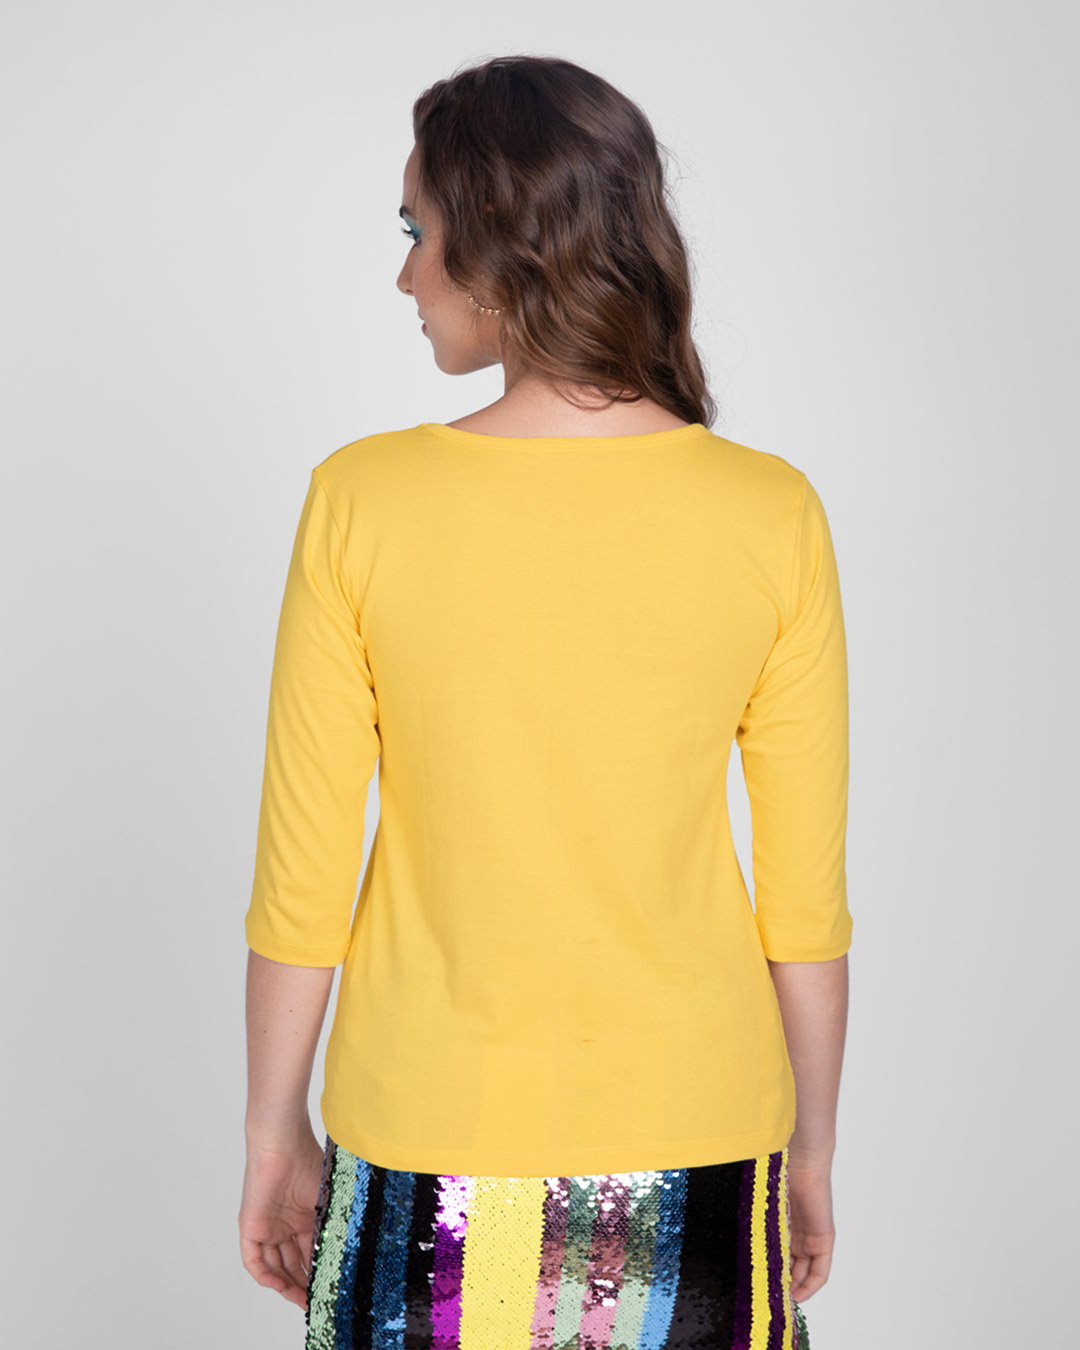 Shop Stay Home And Chill Round Neck 3/4th Sleeve T-Shirt Happy Yellow-Back